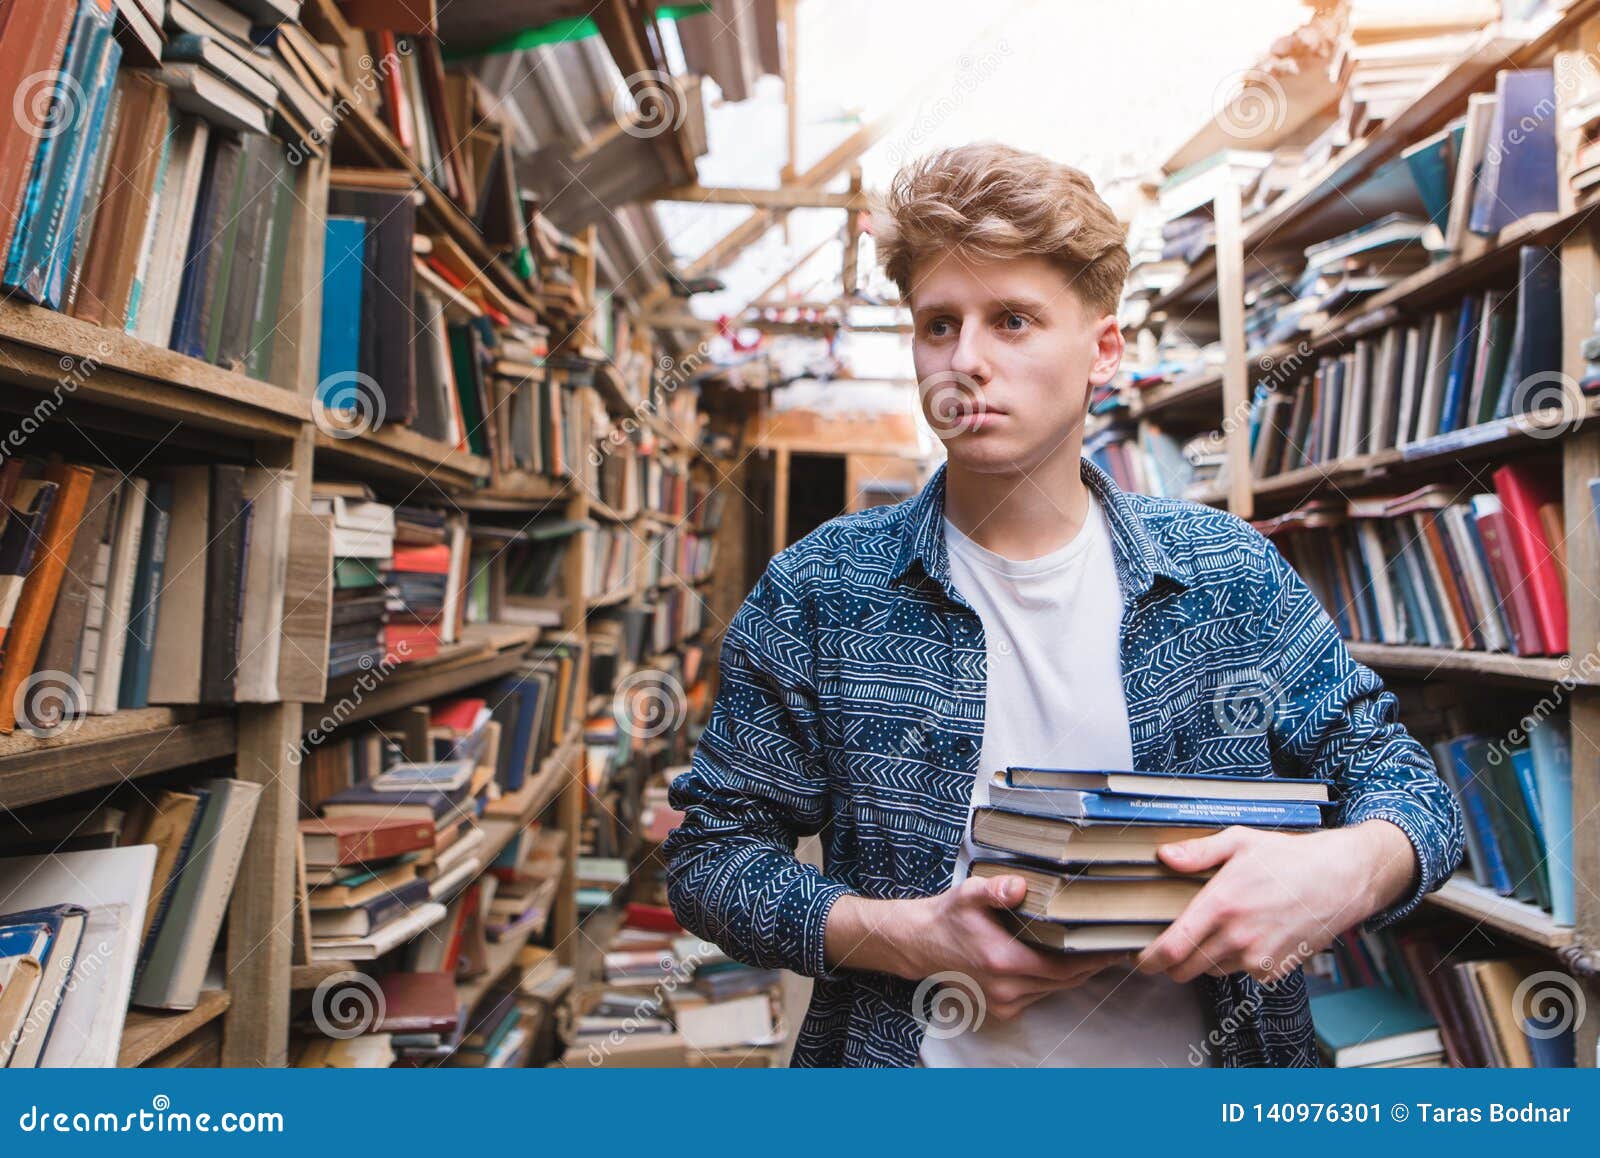 young student walking in a library with books in his hands and looking for literature